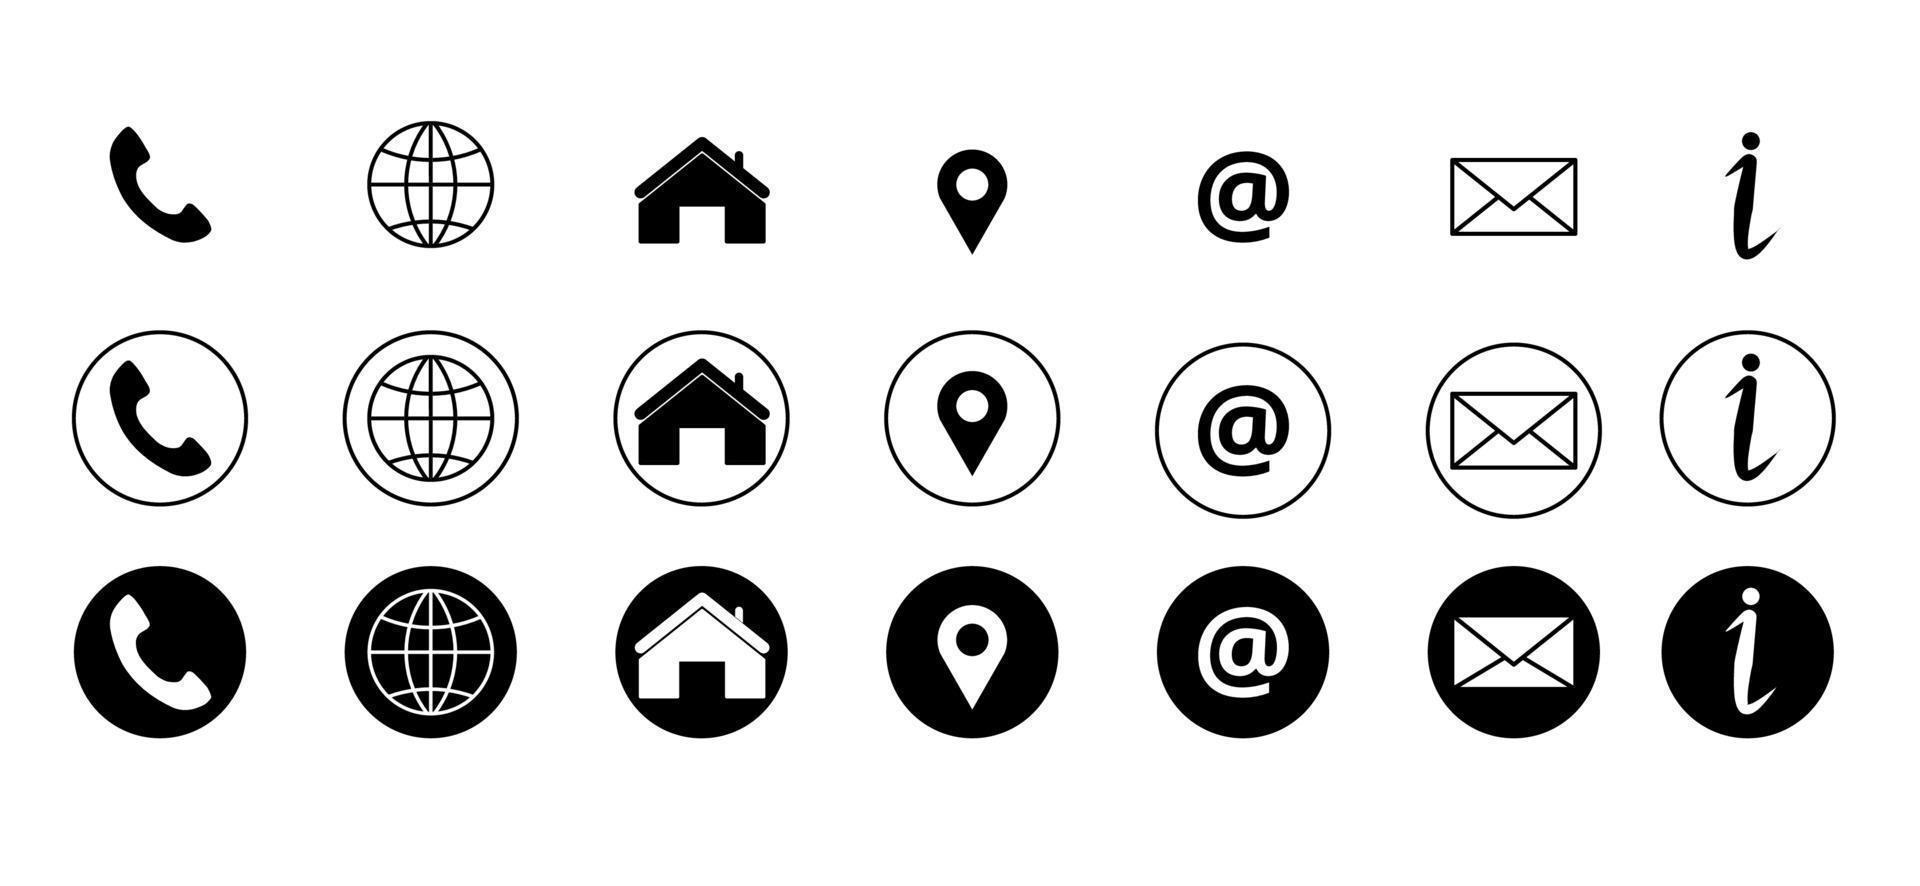 black white web icon, contact us icon, blog and social media round signs.Communication icon symbol vector